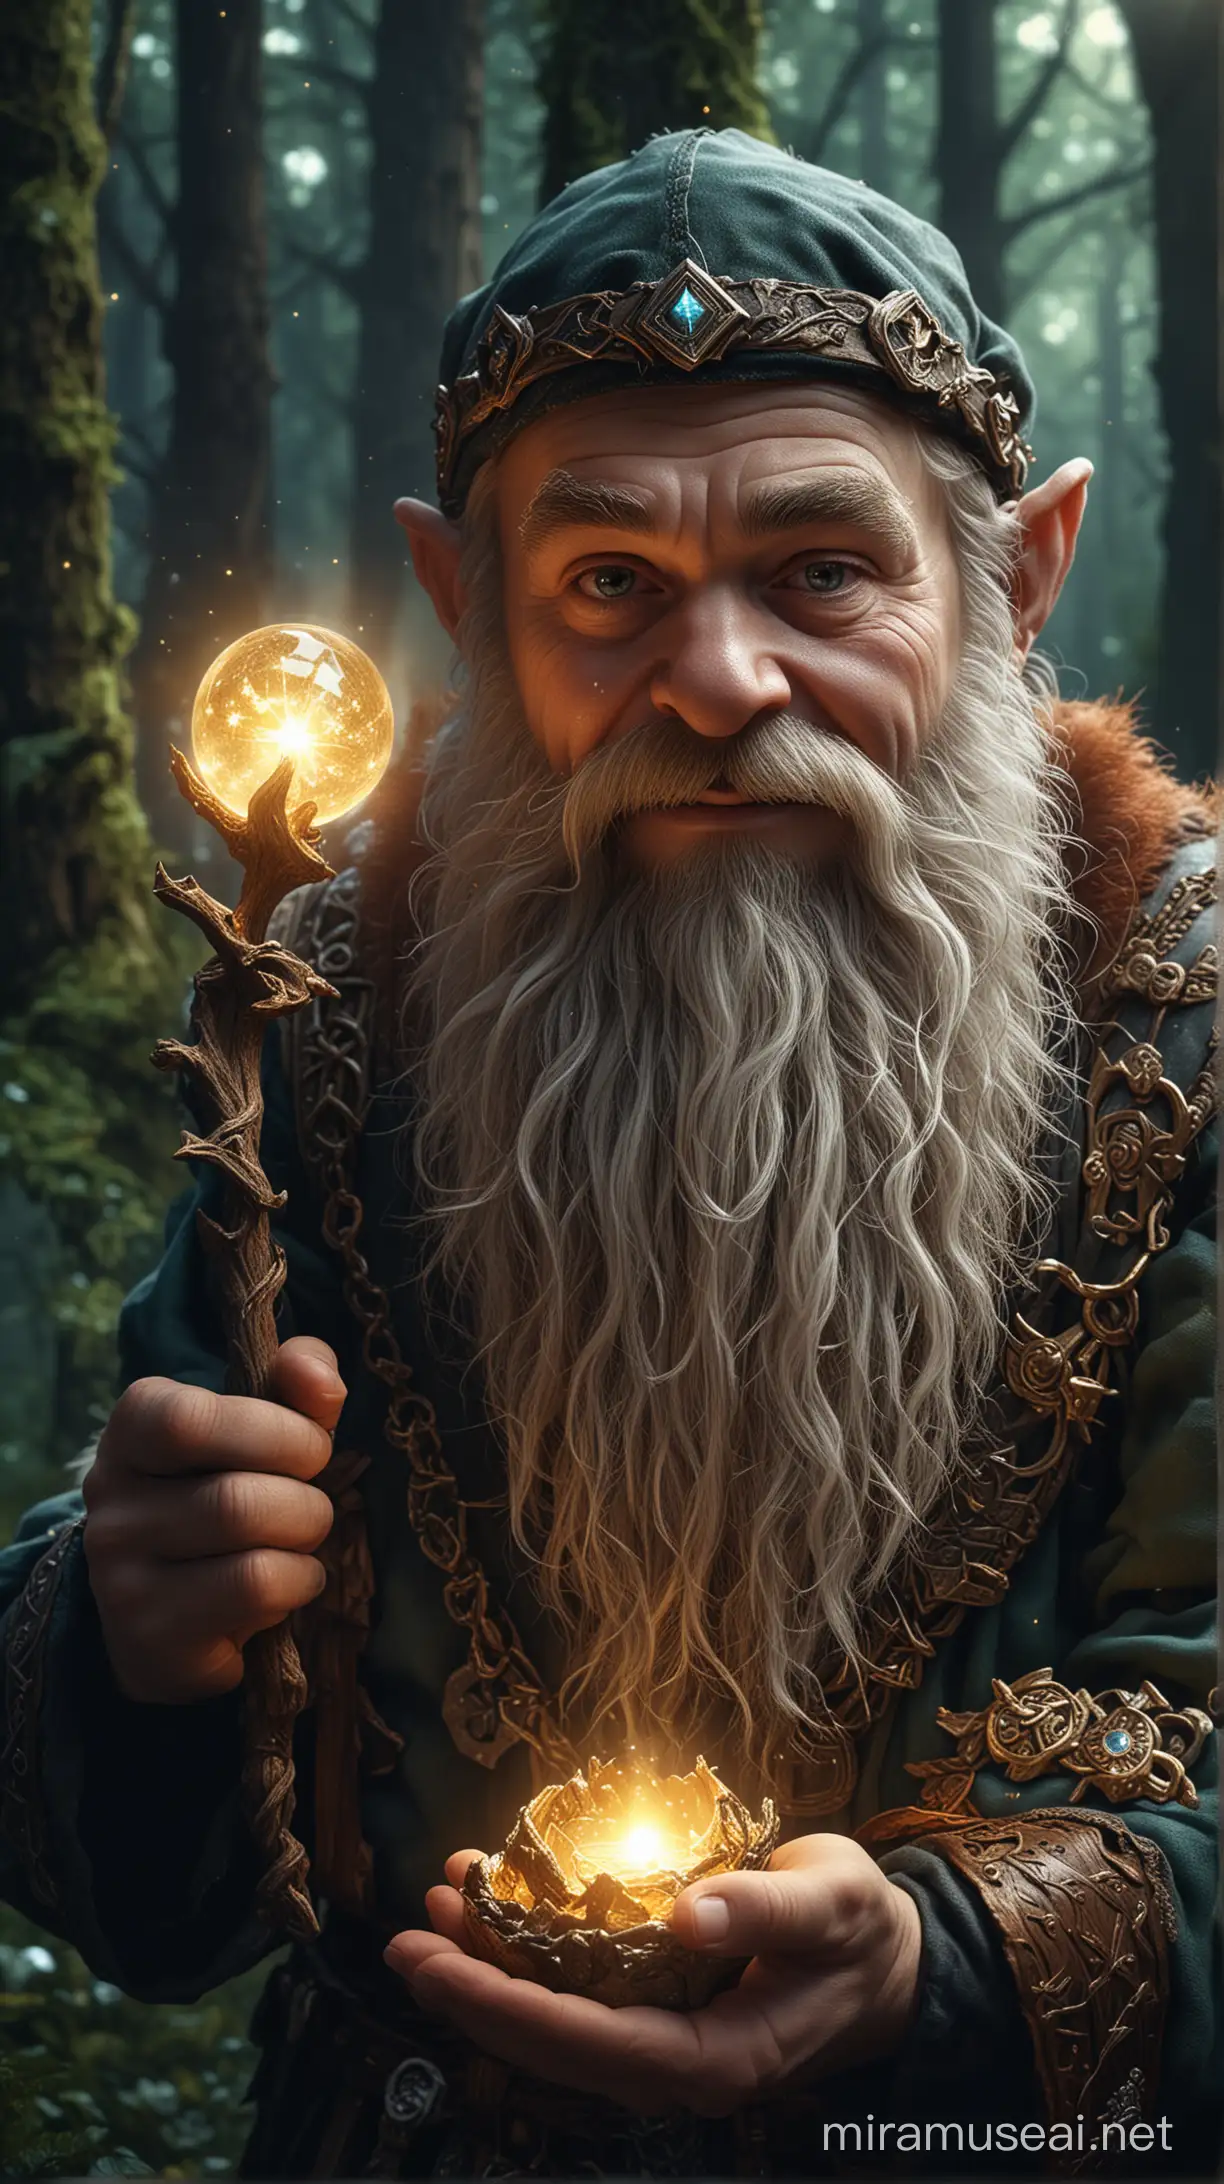 Hyper-realistic photo of a dwarf. Subject is clean-shaven. Subject is holding glowing treasure. Subject is happy. Subject is in an enchanted forest. Starlight. High definition, raw style.